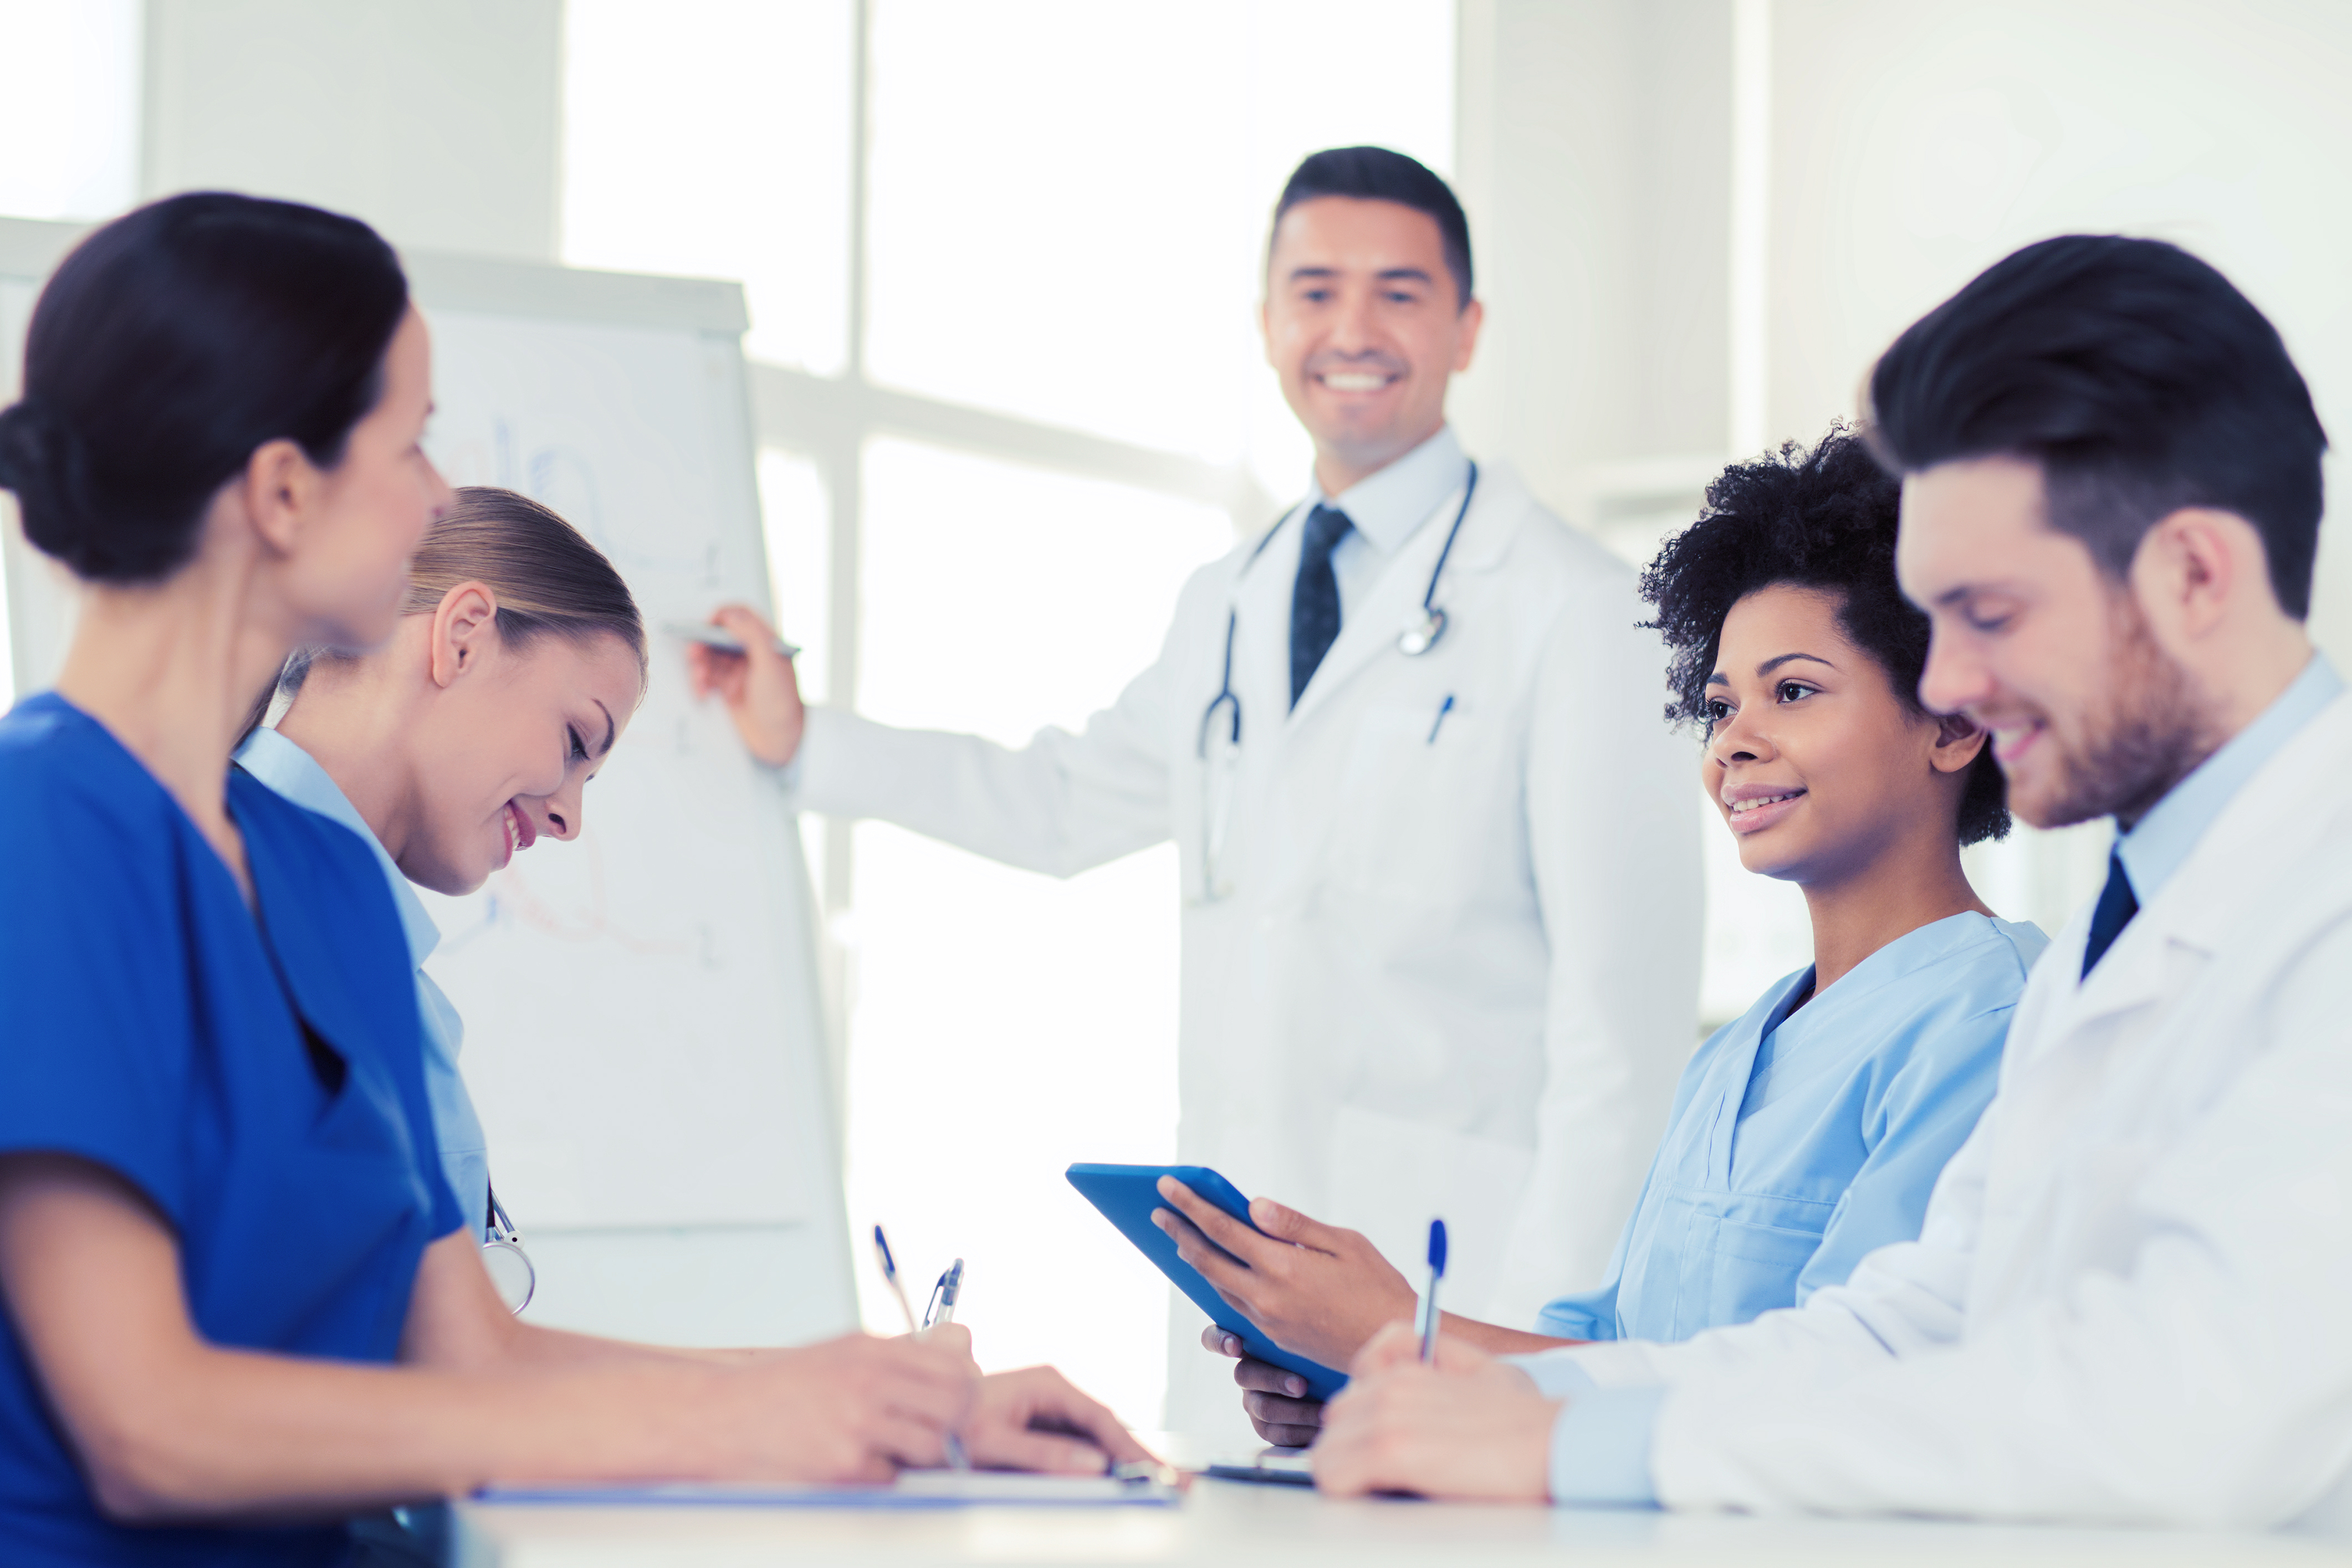 Empower Your Staff Through Health and Social Care Training